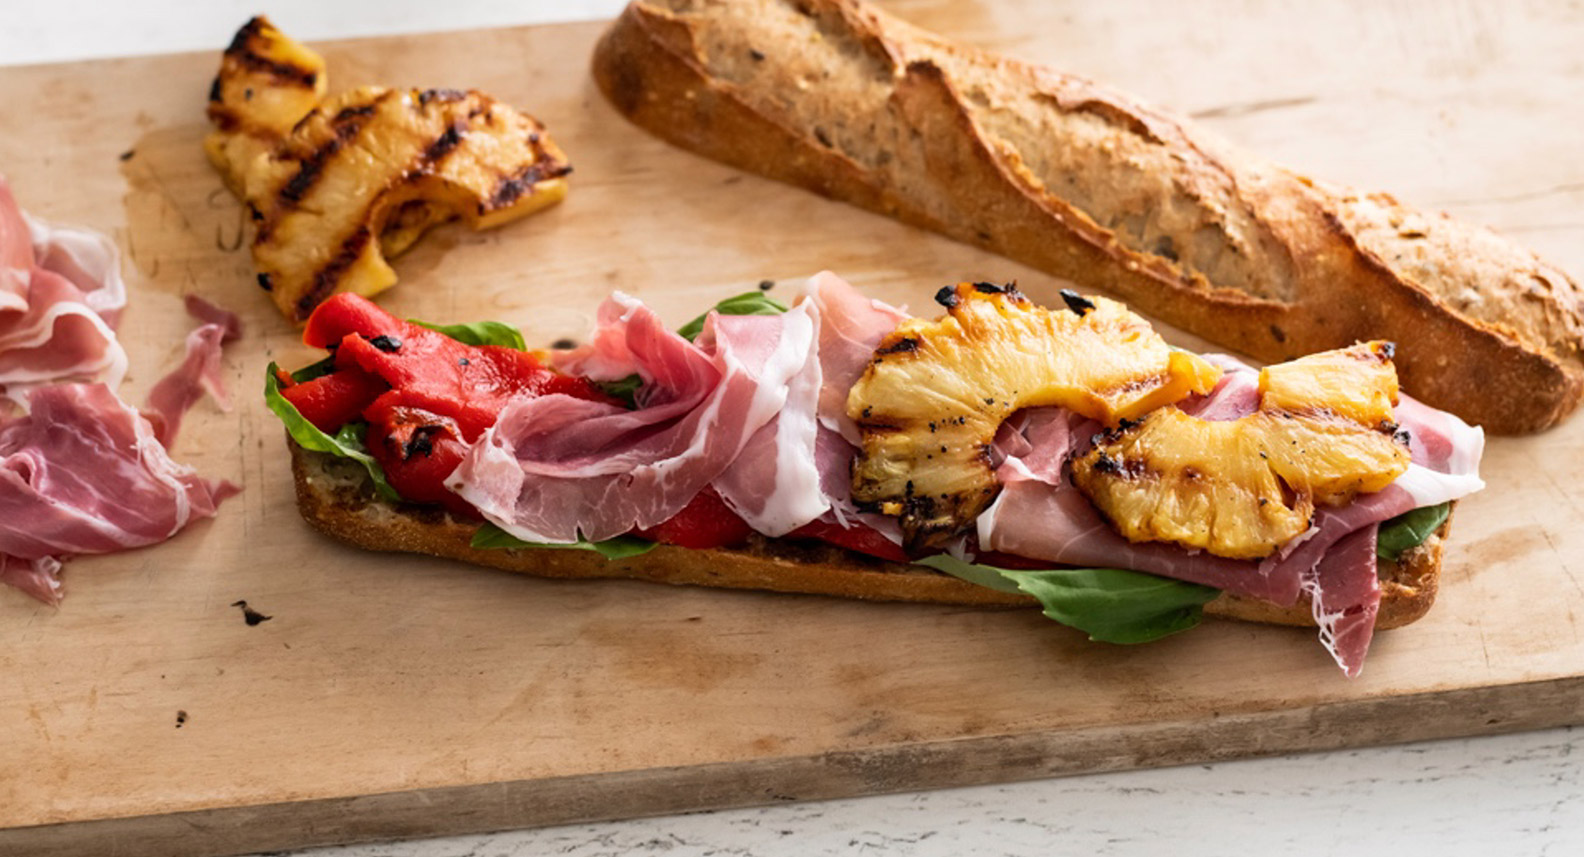 Prosciutto, Roasted Red Peppers, Grilled Pineapple, and Balsamic Sandwich